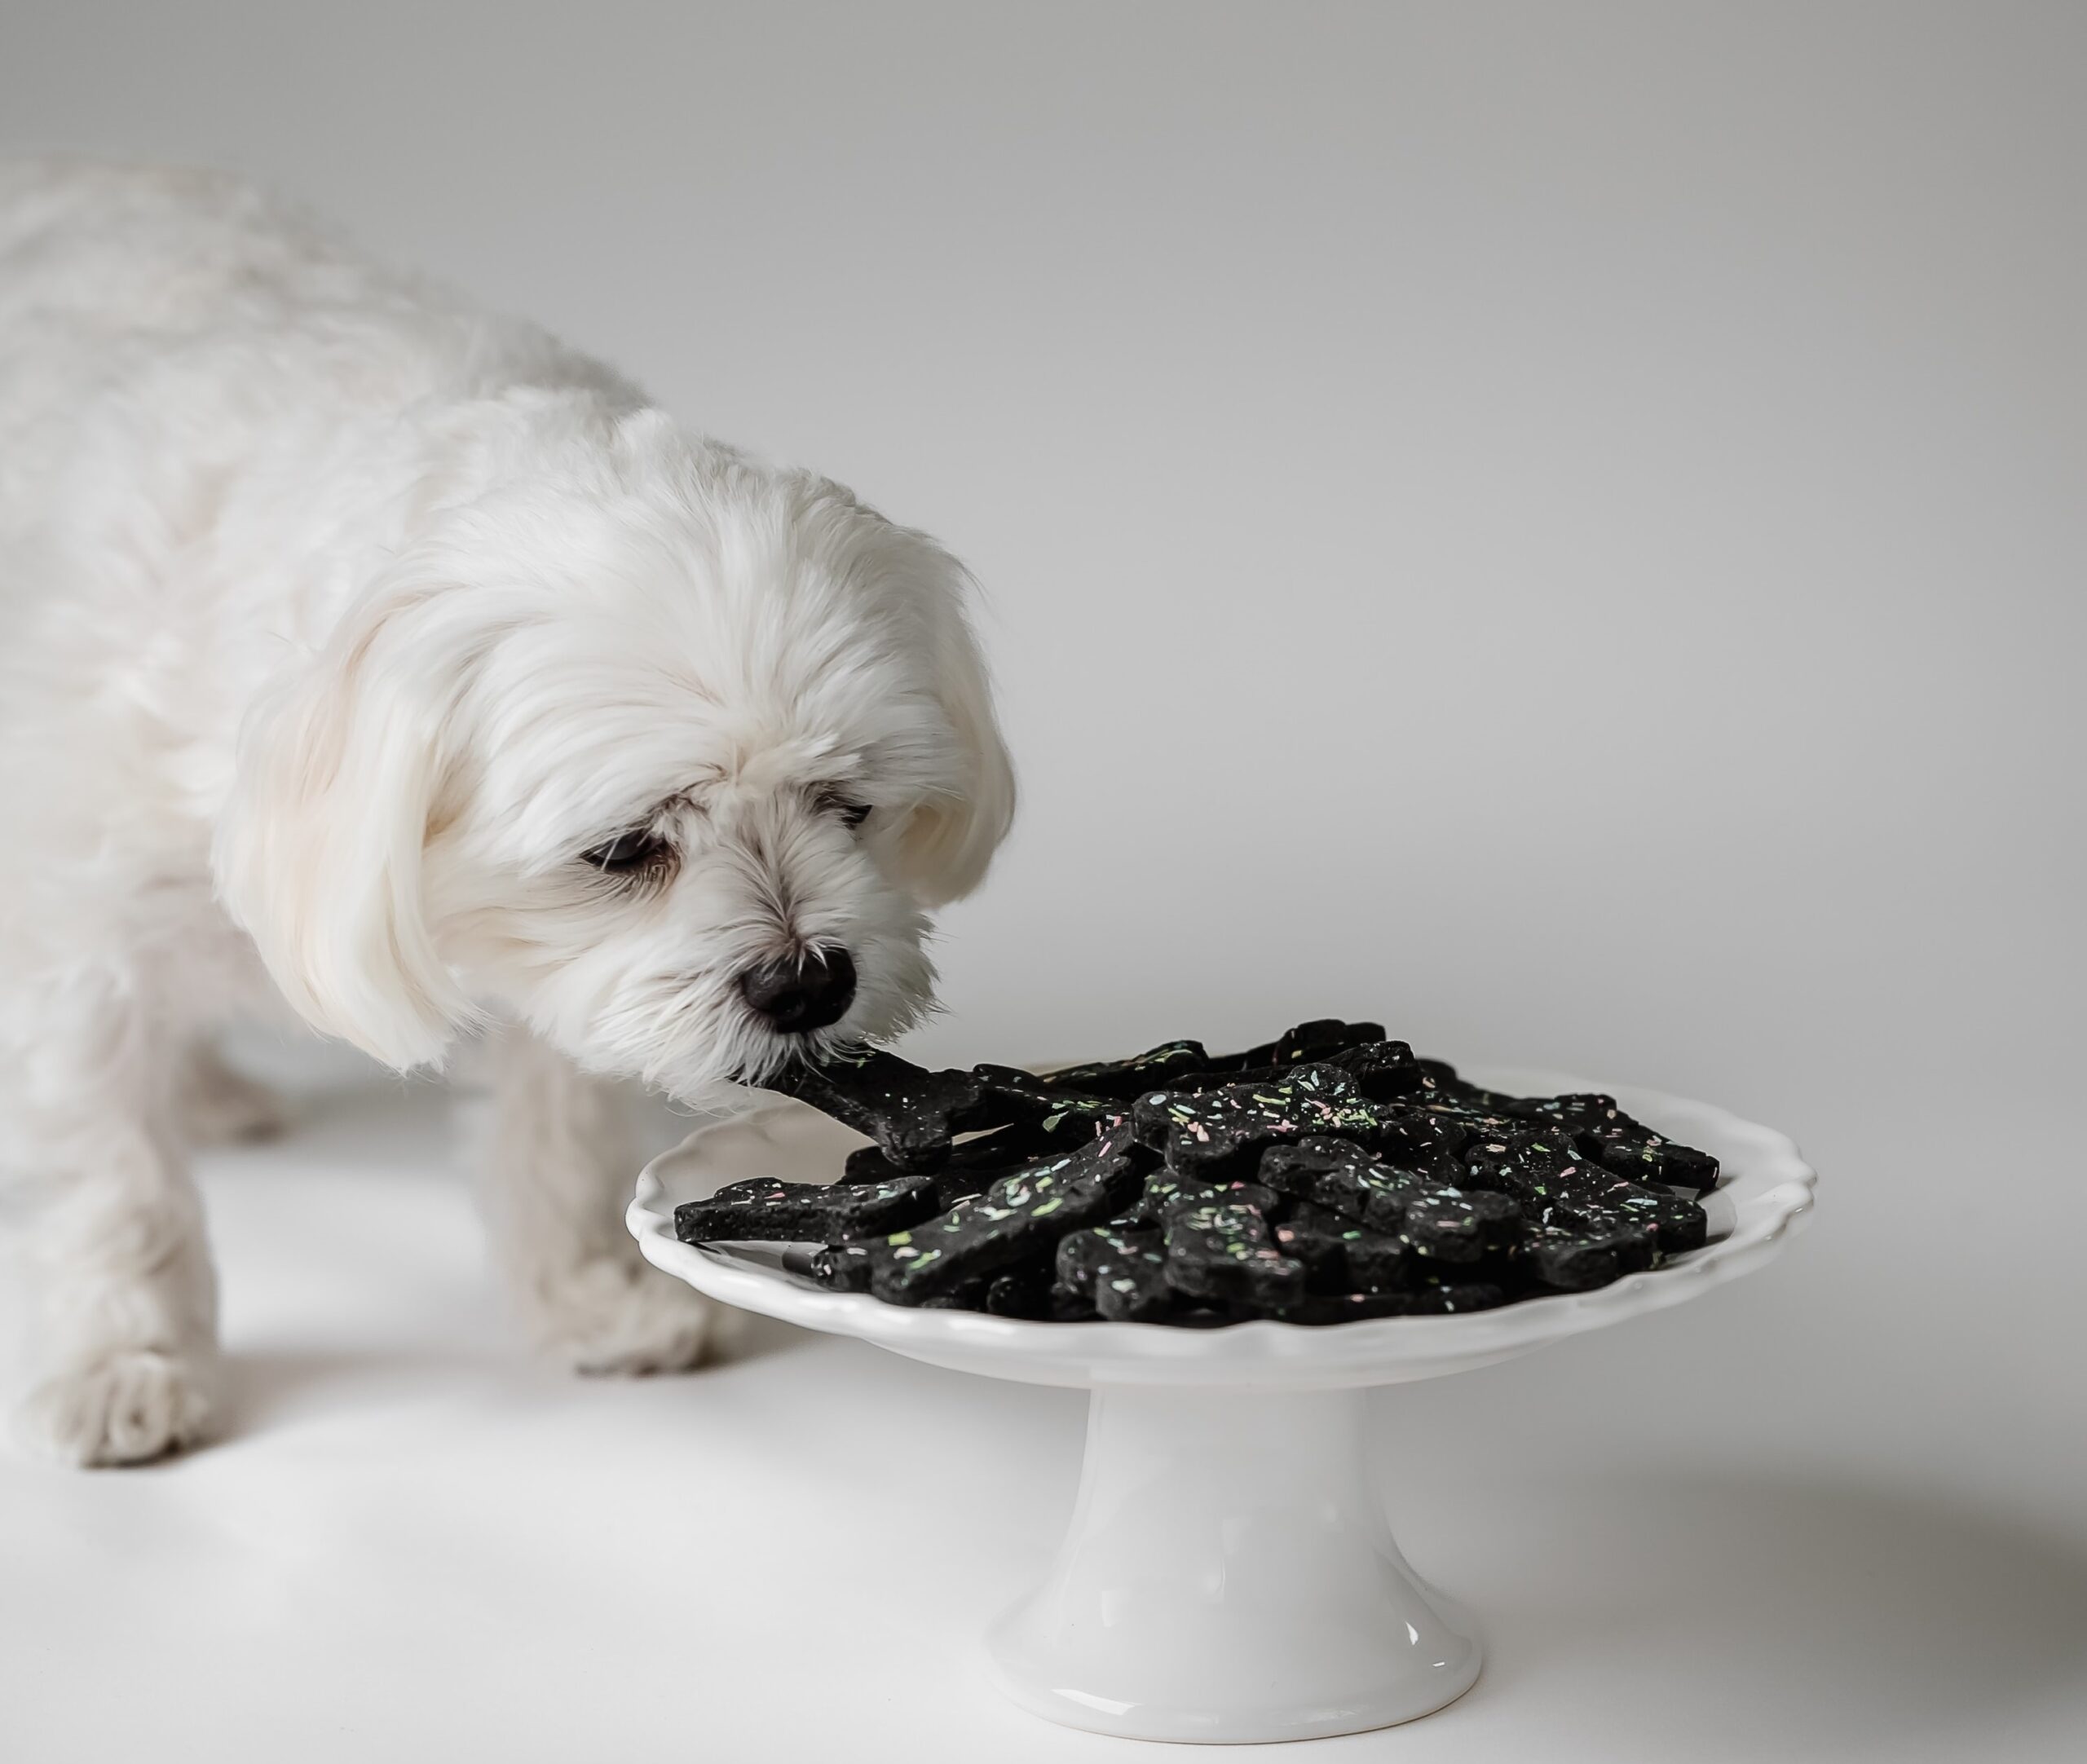 Dog eating dog treats from a cake stand